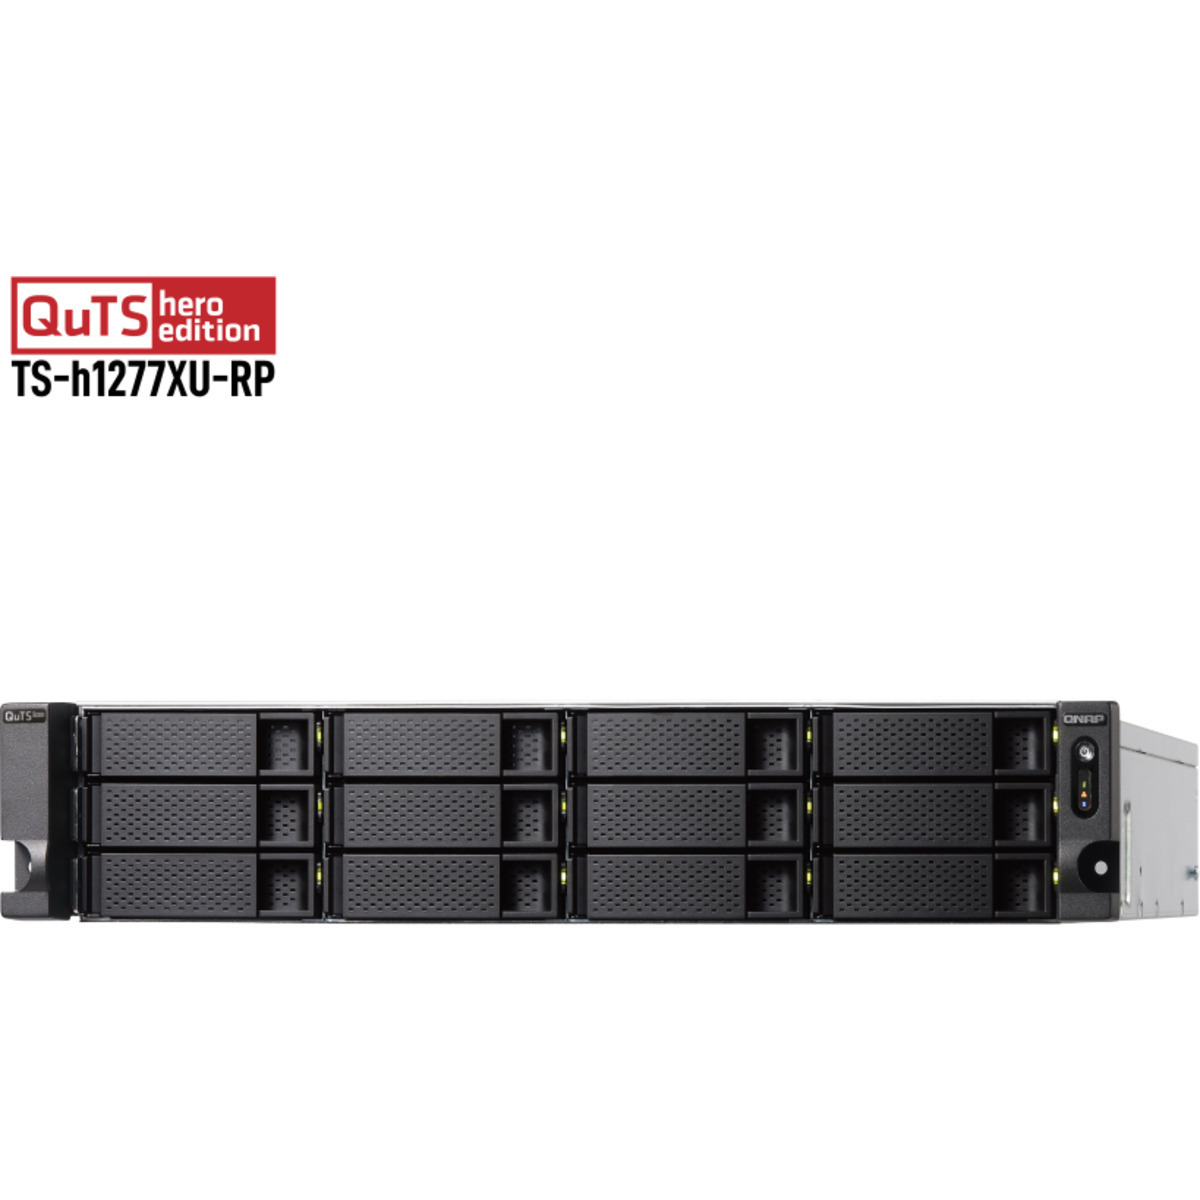 buy $10030 QNAP TS-h1277XU-RP QuTS hero Edition 72tb RackMount NAS - Network Attached Storage Device 12x6000gb Seagate IronWolf Pro ST6000NT001 3.5 7200rpm SATA 6Gb/s HDD NAS Class Drives Installed - Burn-In Tested - nas headquarters buy network attached storage server device das new raid-5 free shipping simply usa TS-h1277XU-RP QuTS hero Edition